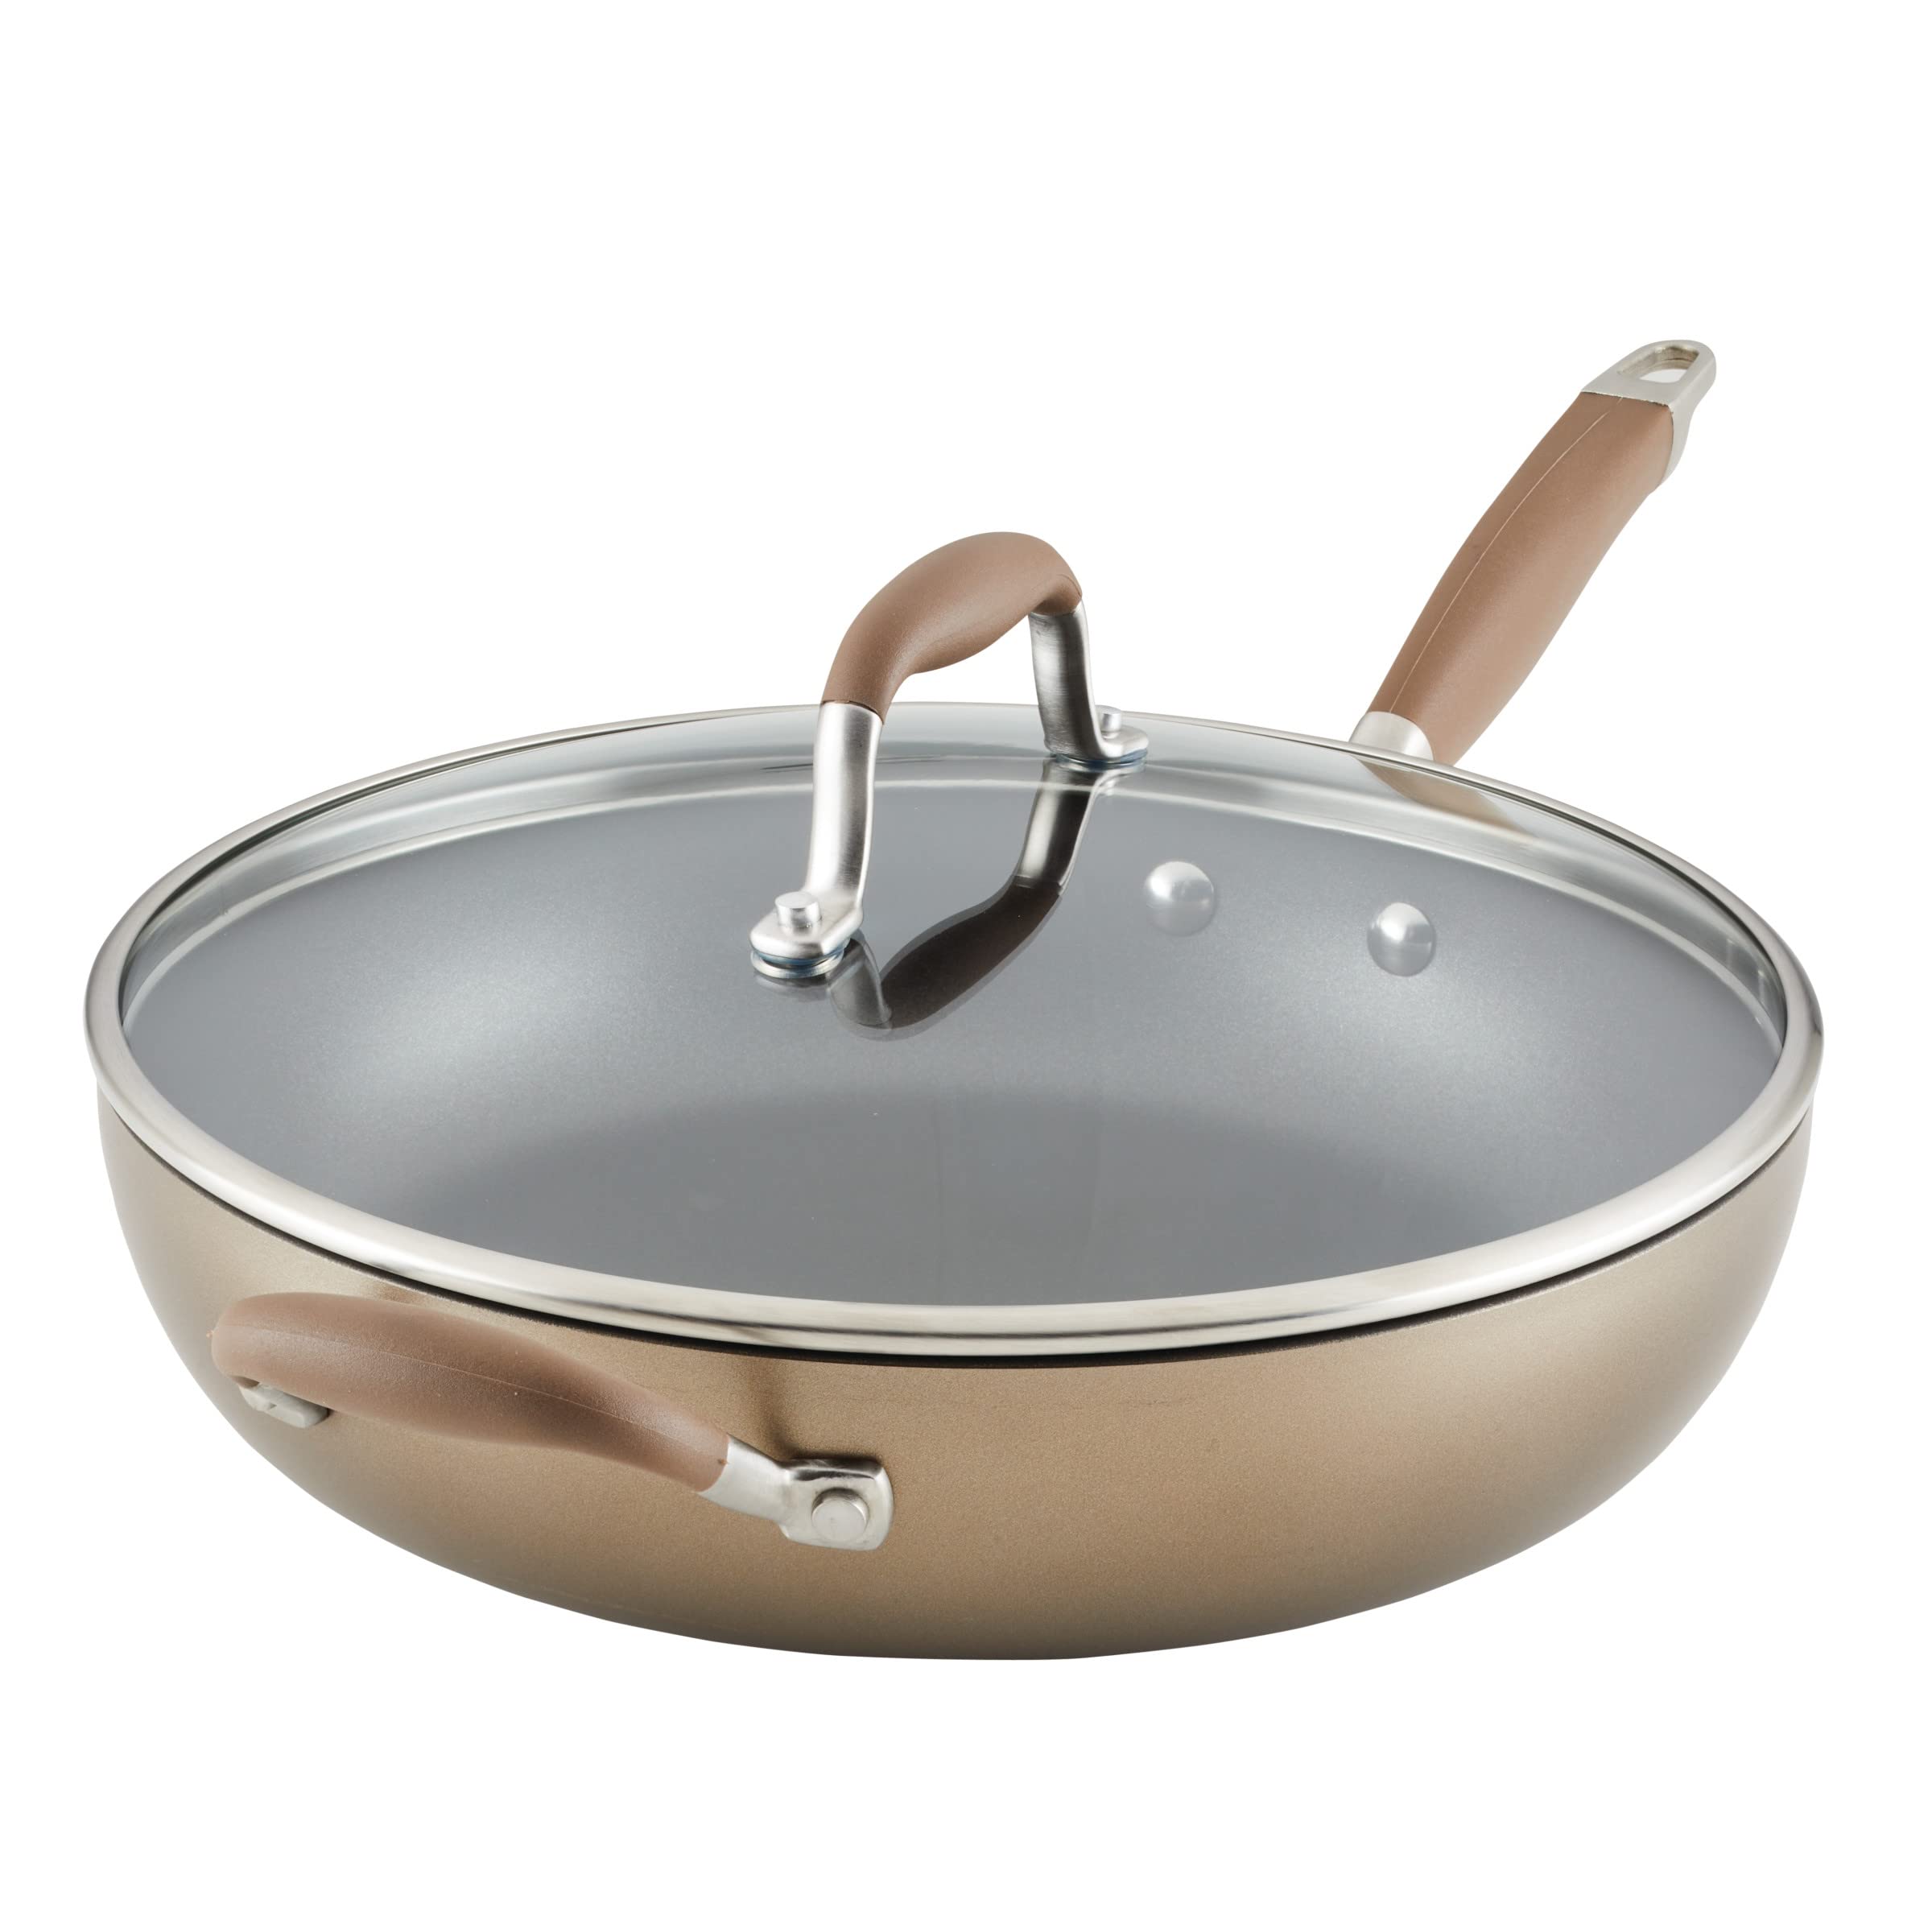 best nonstick pan to cook on electric stove